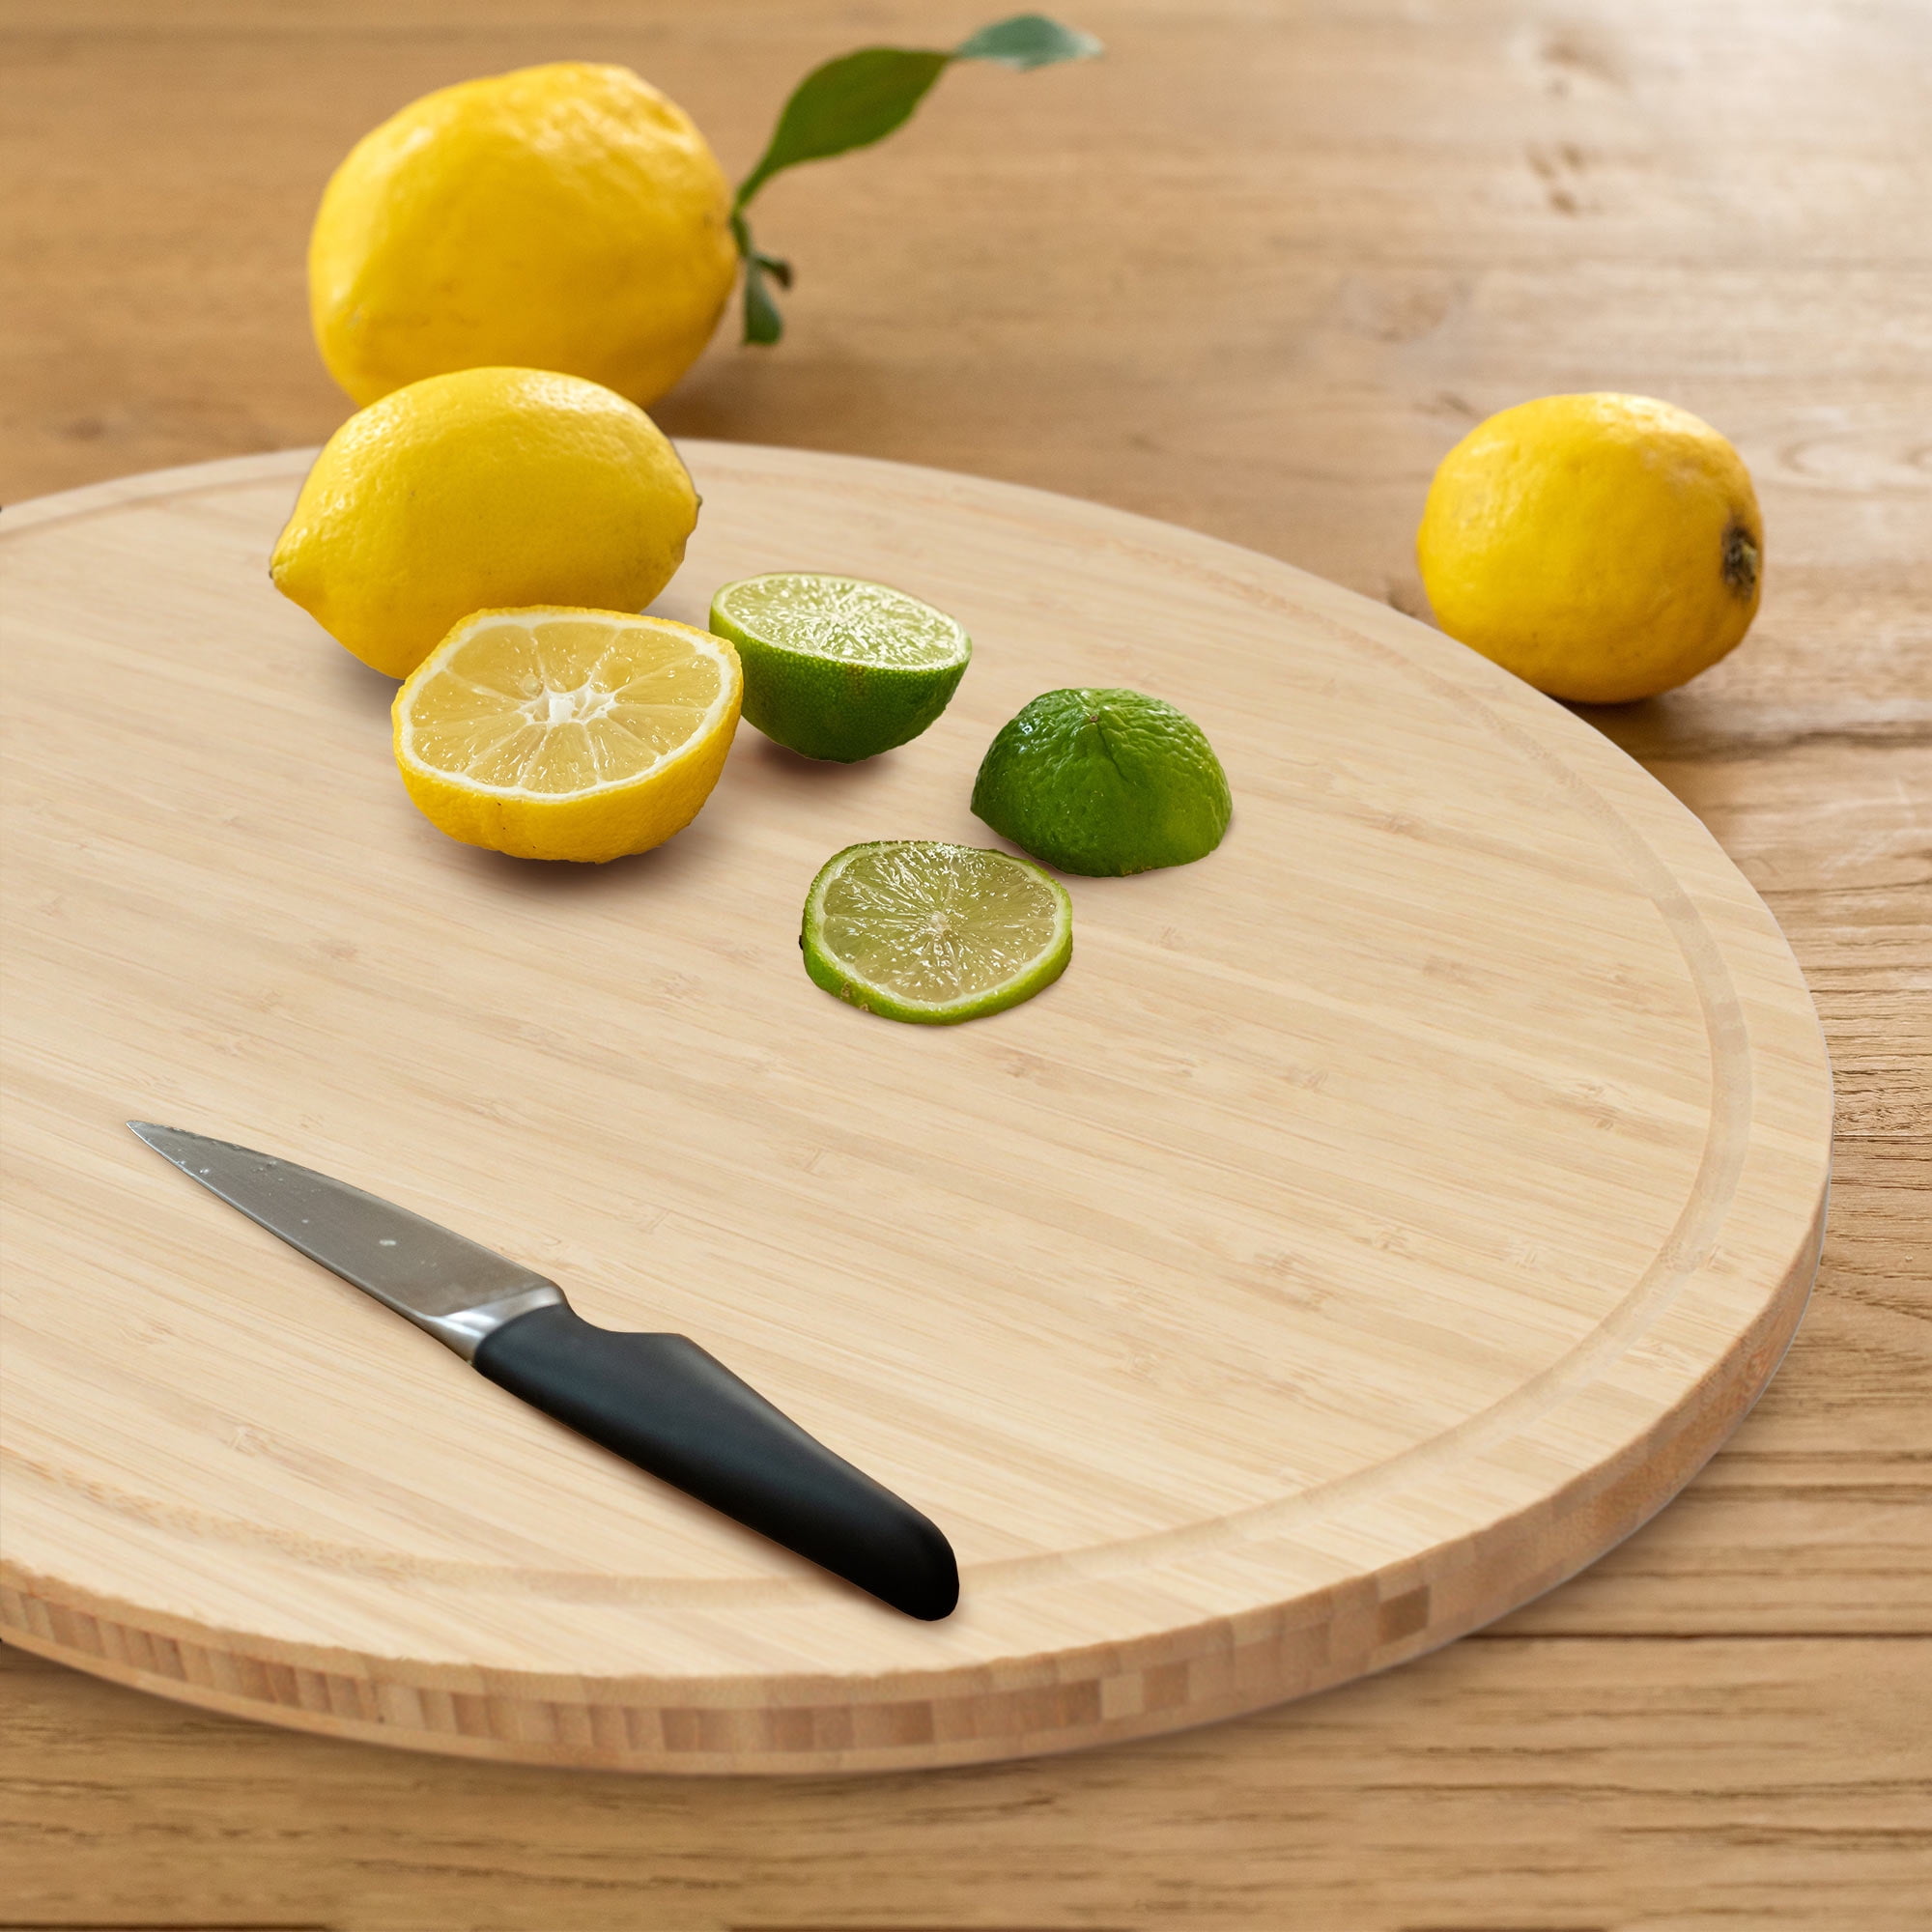 Elegant Oval Cutting and Serving Boards Set of 3 (S, M, L) 210 211